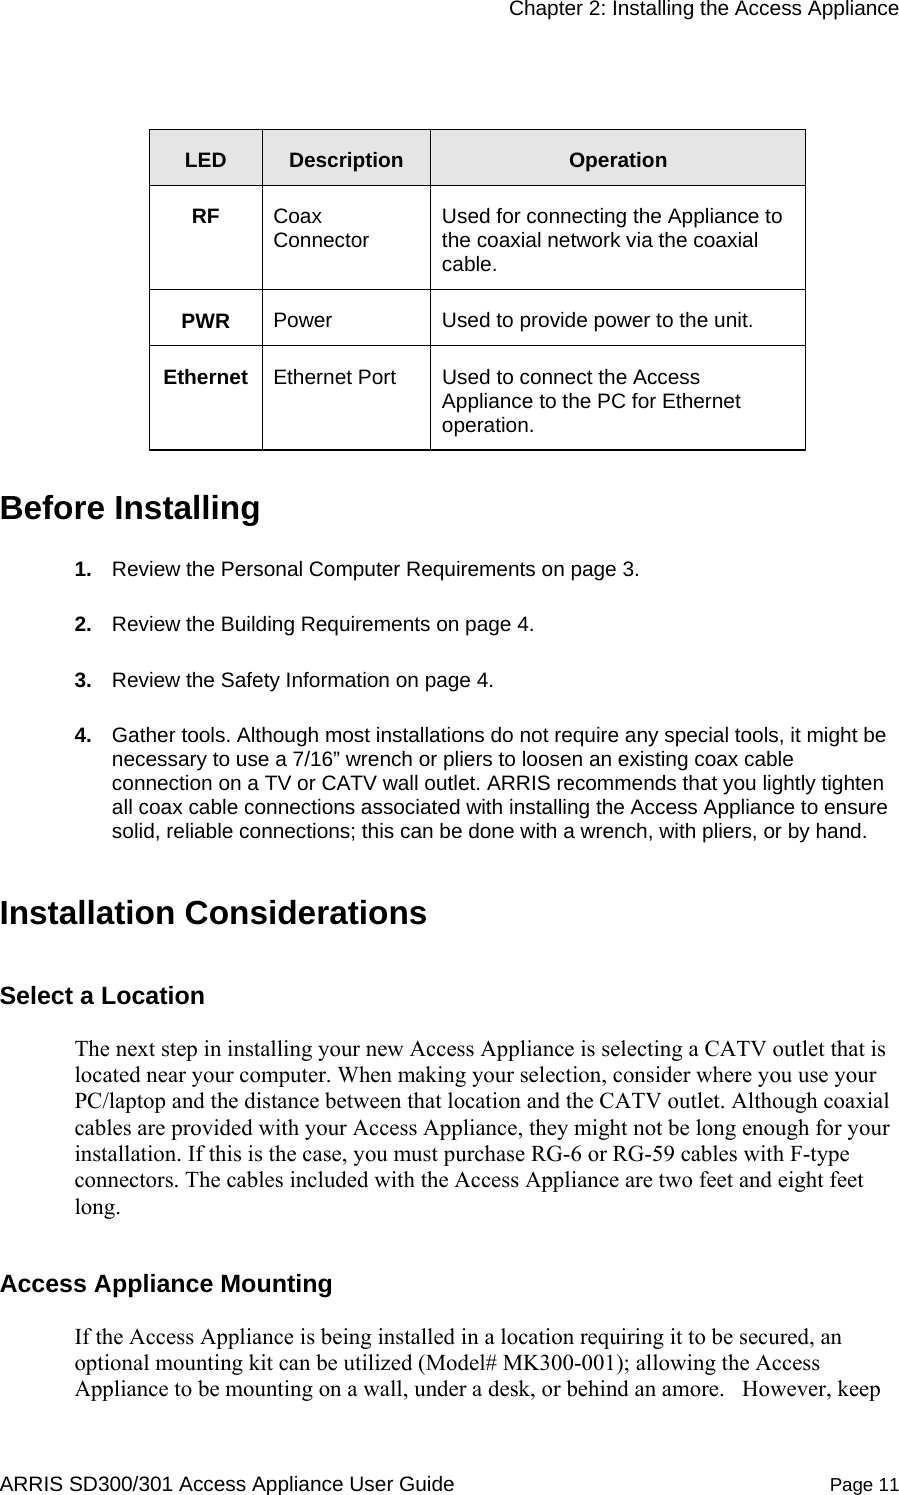     Chapter 2: Installing the Access Appliance  ARRIS SD300/301 Access Appliance User Guide  Page 11  LED  Description  Operation RF  Coax Connector  Used for connecting the Appliance to the coaxial network via the coaxial cable.  PWR  Power  Used to provide power to the unit.  Ethernet  Ethernet Port  Used to connect the Access Appliance to the PC for Ethernet operation. Before Installing 1.  Review the Personal Computer Requirements on page 3. 2.  Review the Building Requirements on page 4. 3.  Review the Safety Information on page 4. 4.  Gather tools. Although most installations do not require any special tools, it might be necessary to use a 7/16” wrench or pliers to loosen an existing coax cable connection on a TV or CATV wall outlet. ARRIS recommends that you lightly tighten all coax cable connections associated with installing the Access Appliance to ensure solid, reliable connections; this can be done with a wrench, with pliers, or by hand.  Installation Considerations Select a Location  The next step in installing your new Access Appliance is selecting a CATV outlet that is located near your computer. When making your selection, consider where you use your PC/laptop and the distance between that location and the CATV outlet. Although coaxial cables are provided with your Access Appliance, they might not be long enough for your installation. If this is the case, you must purchase RG-6 or RG-59 cables with F-type connectors. The cables included with the Access Appliance are two feet and eight feet long. Access Appliance Mounting  If the Access Appliance is being installed in a location requiring it to be secured, an optional mounting kit can be utilized (Model# MK300-001); allowing the Access Appliance to be mounting on a wall, under a desk, or behind an amore.   However, keep 